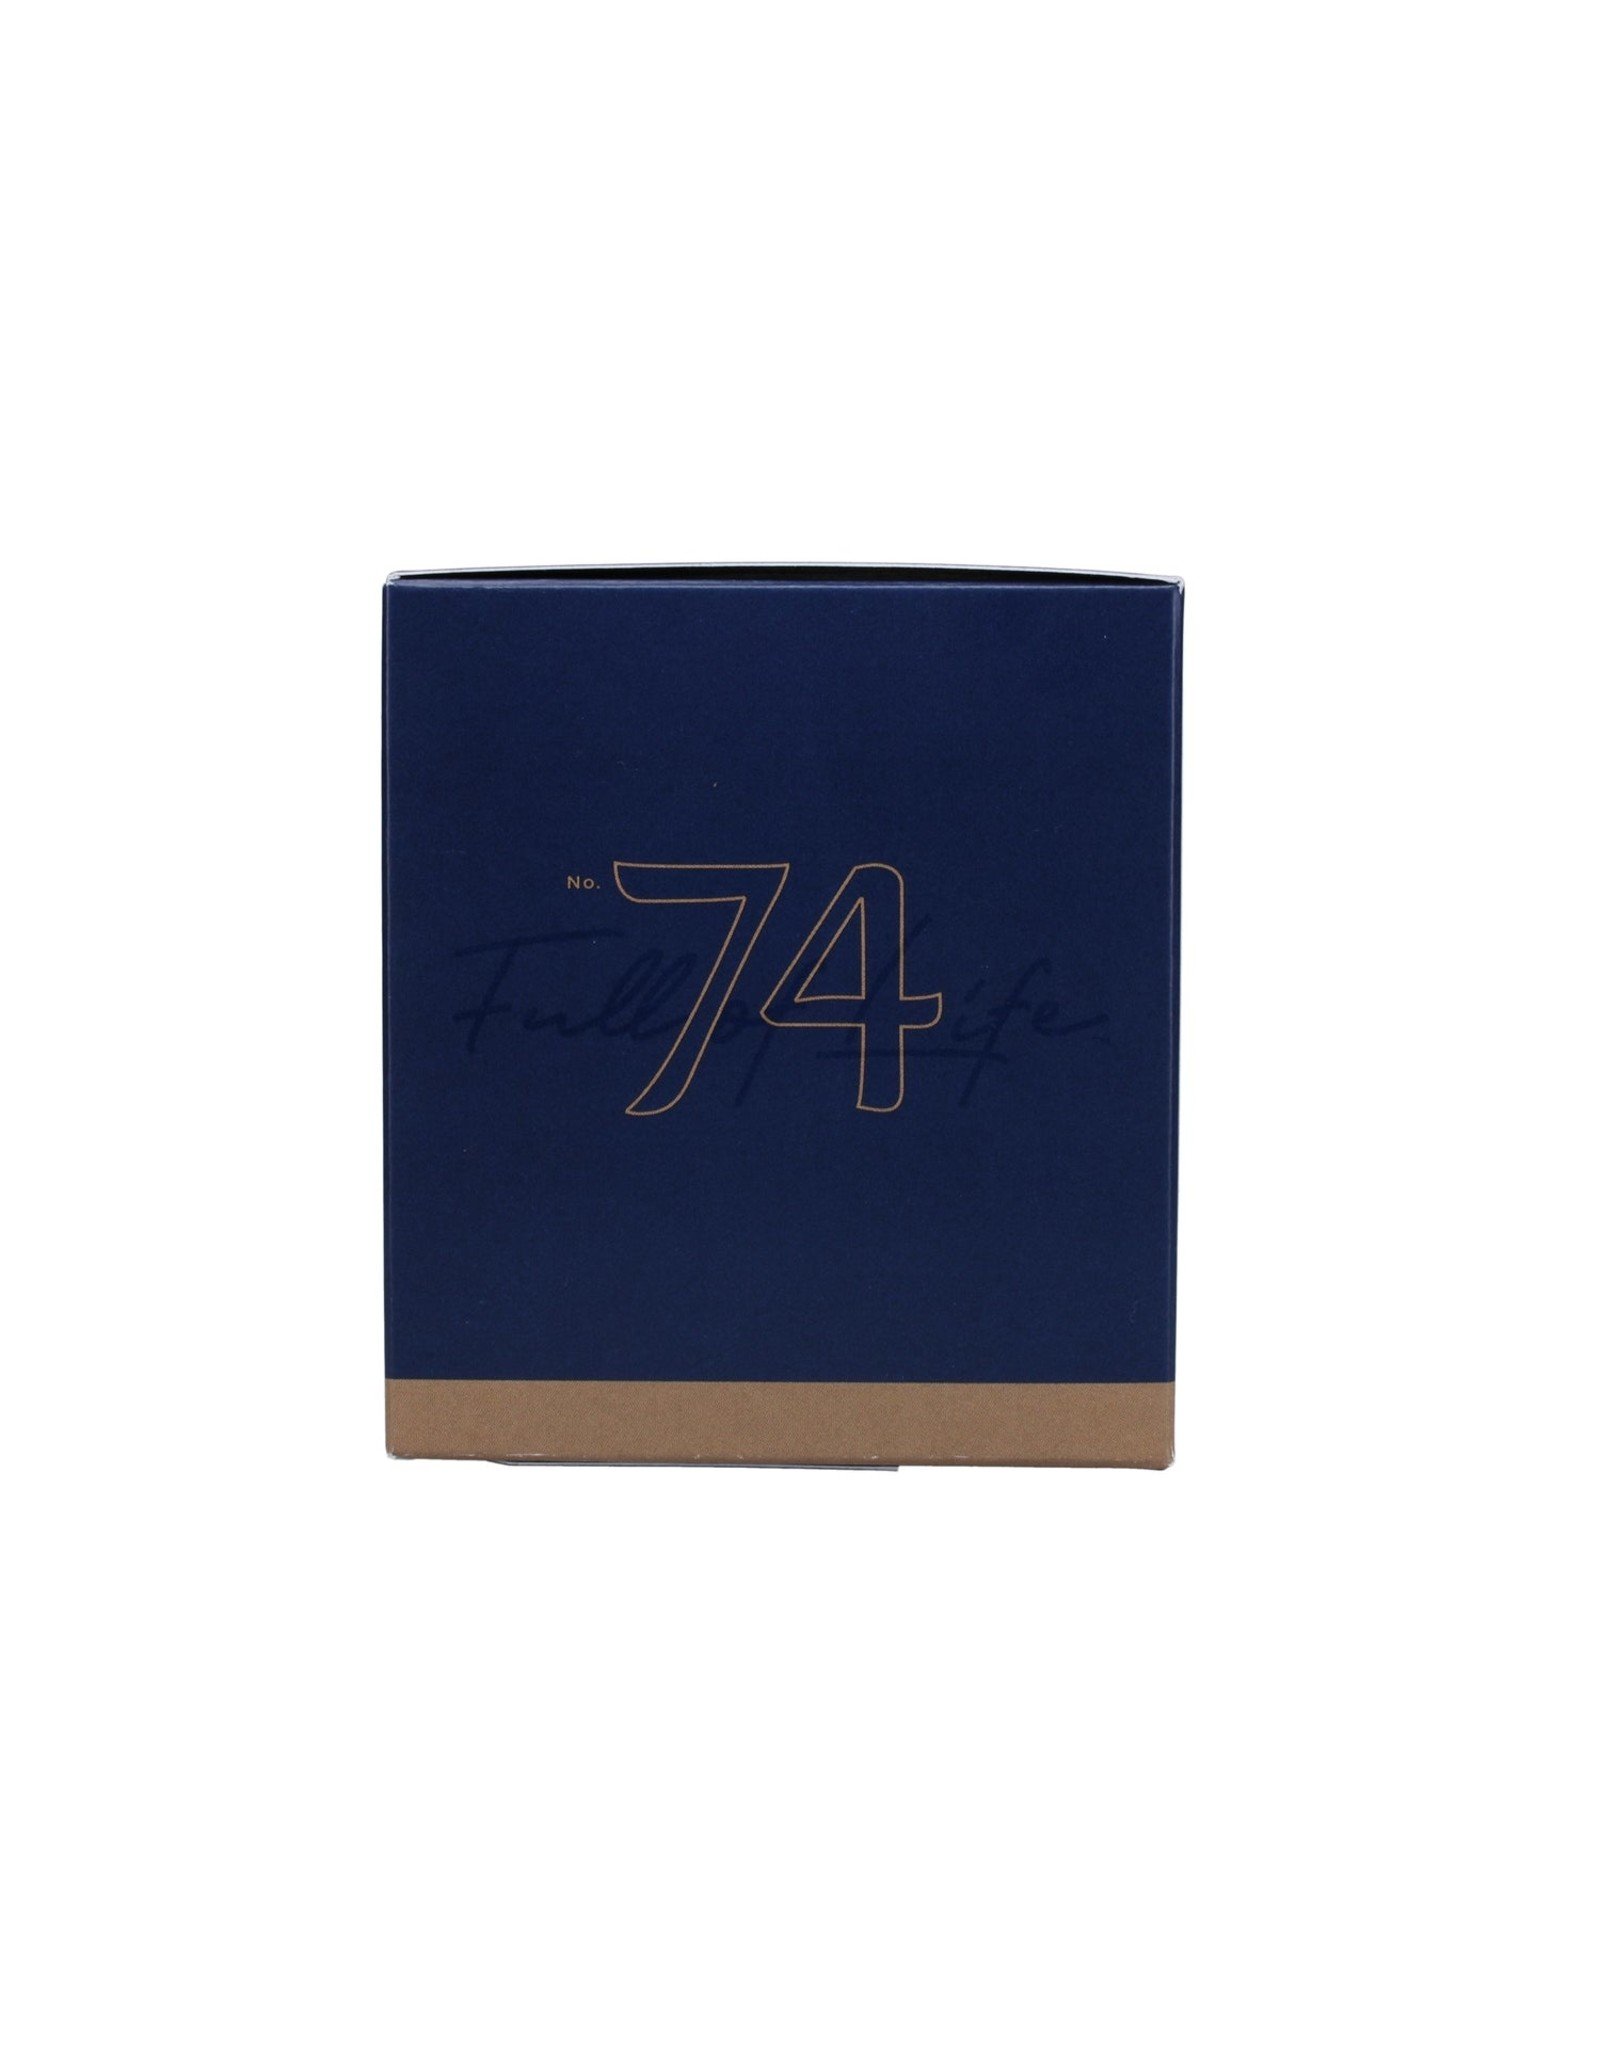 Trapp Trapp No. 74 Tabac & Leather 7 oz. Candle in Signature Box